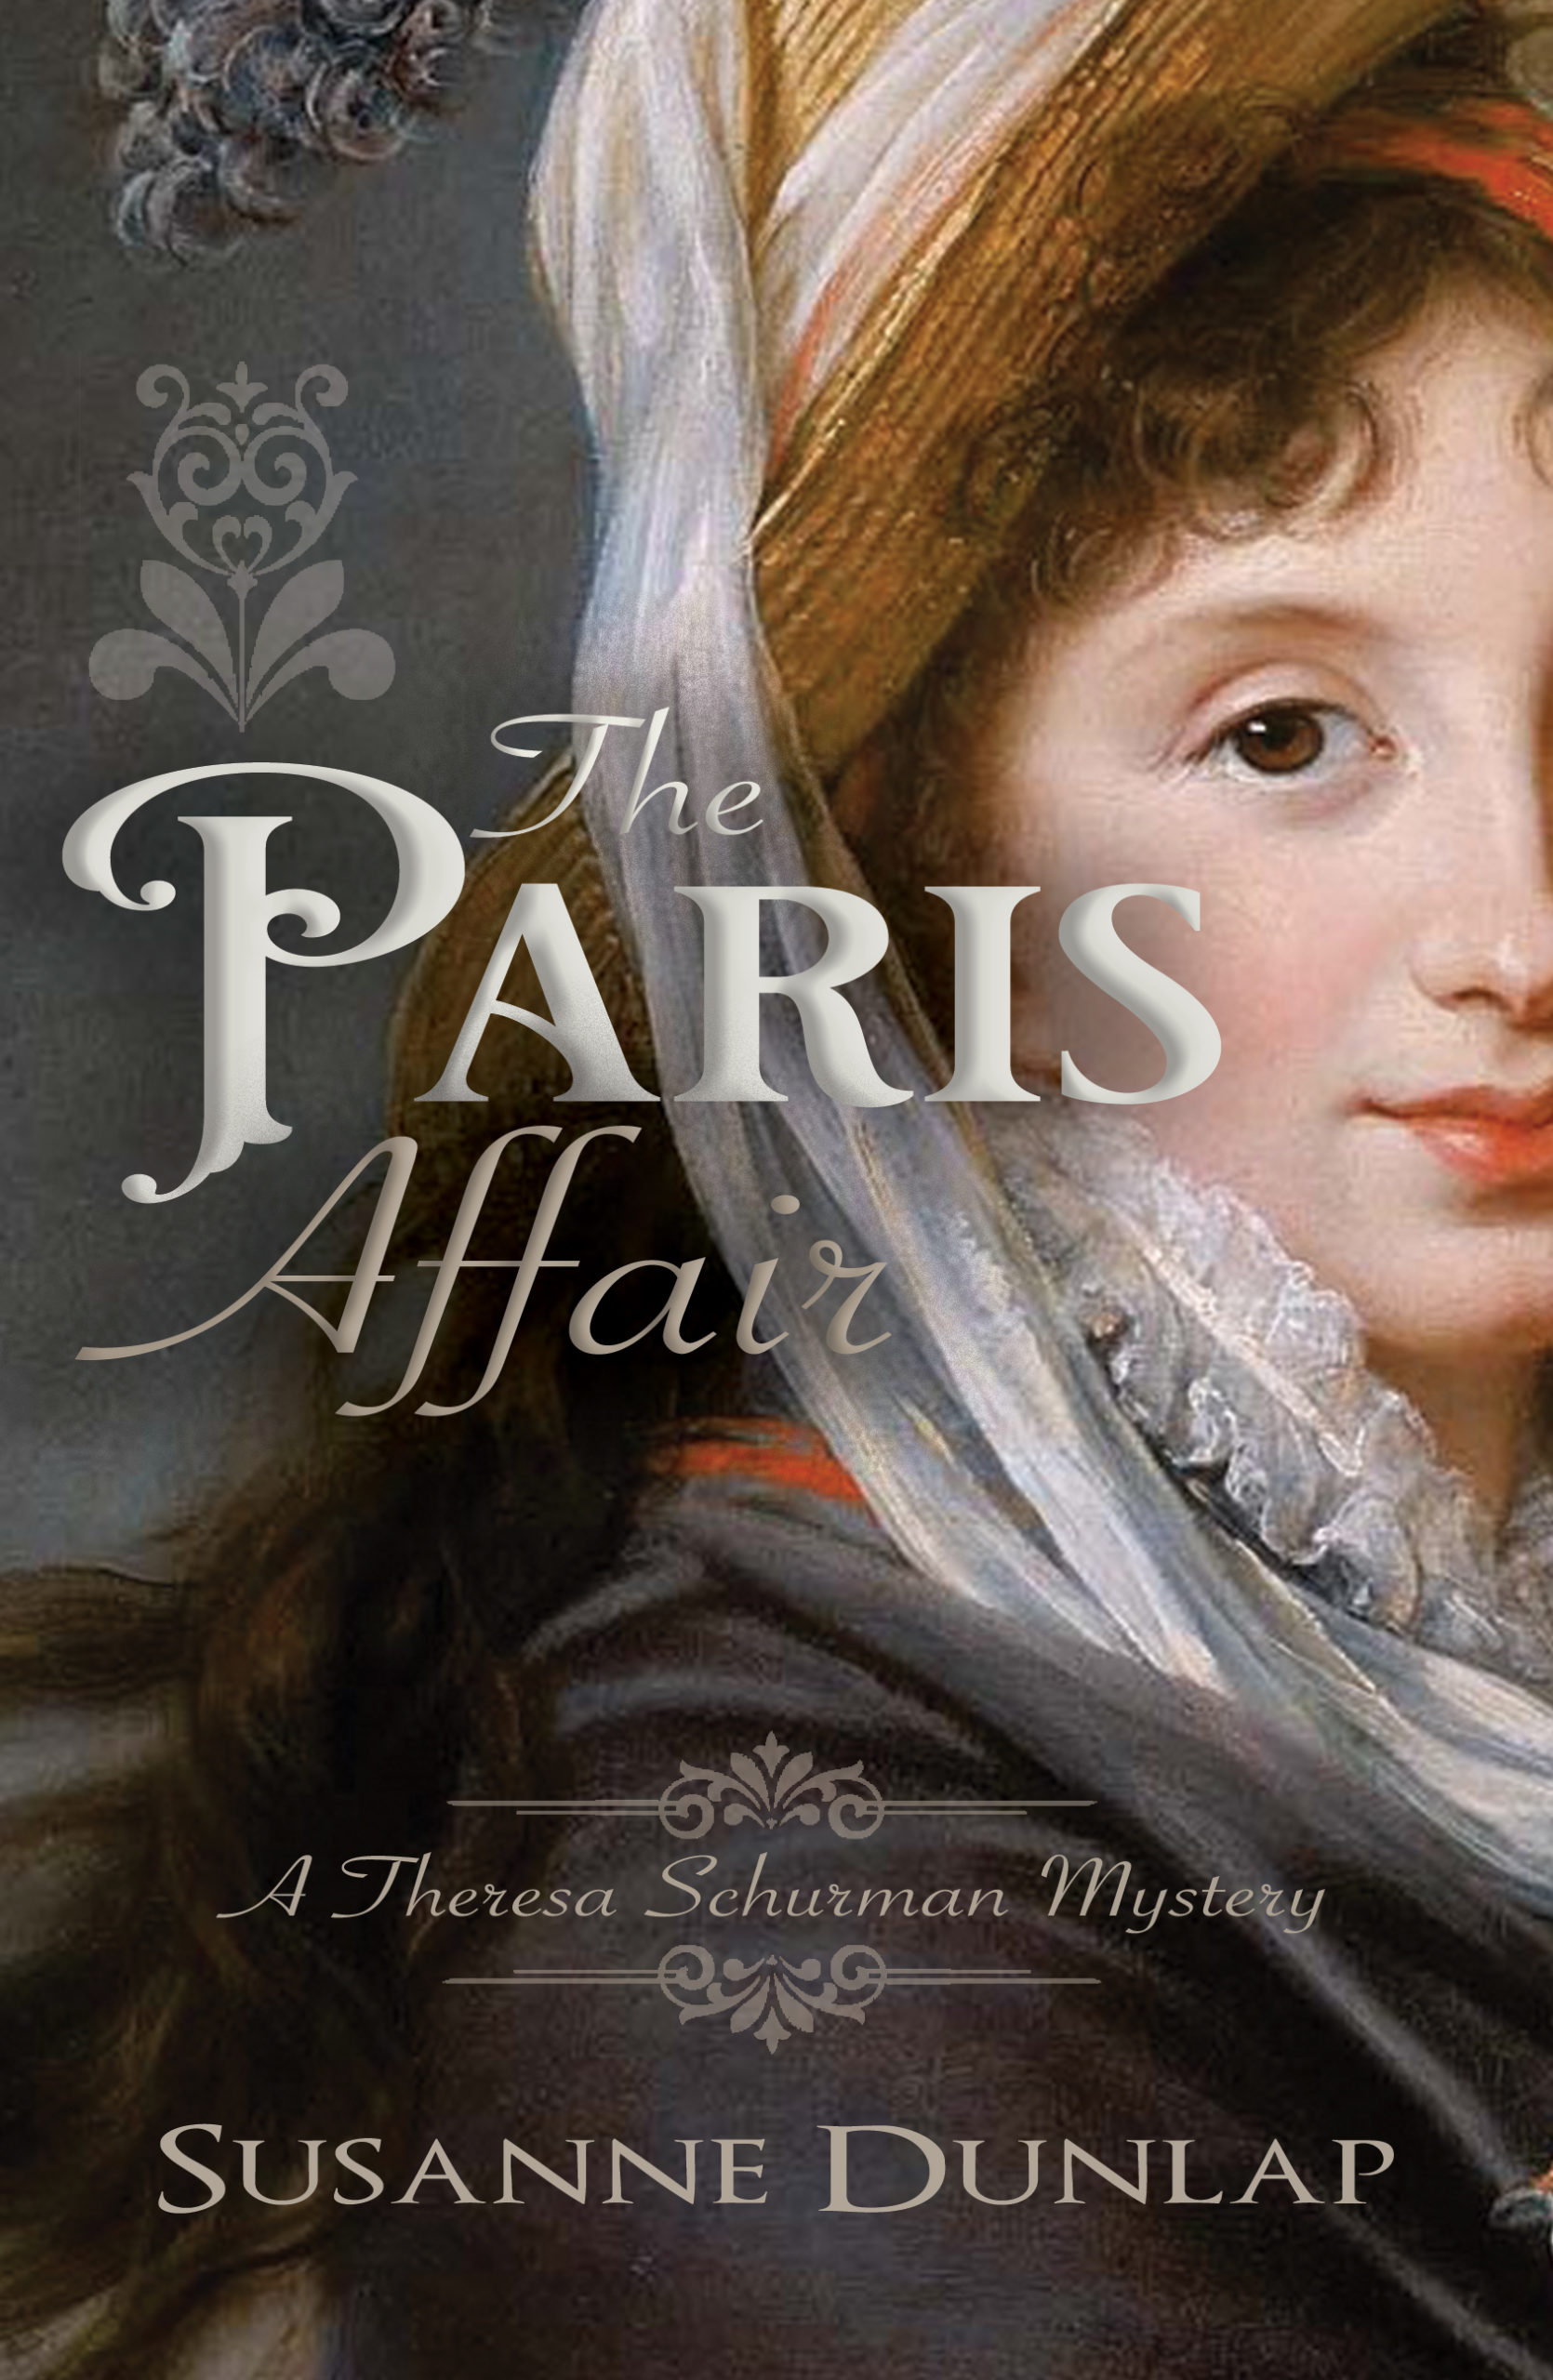 One Month to the Launch of THE PARIS AFFAIR